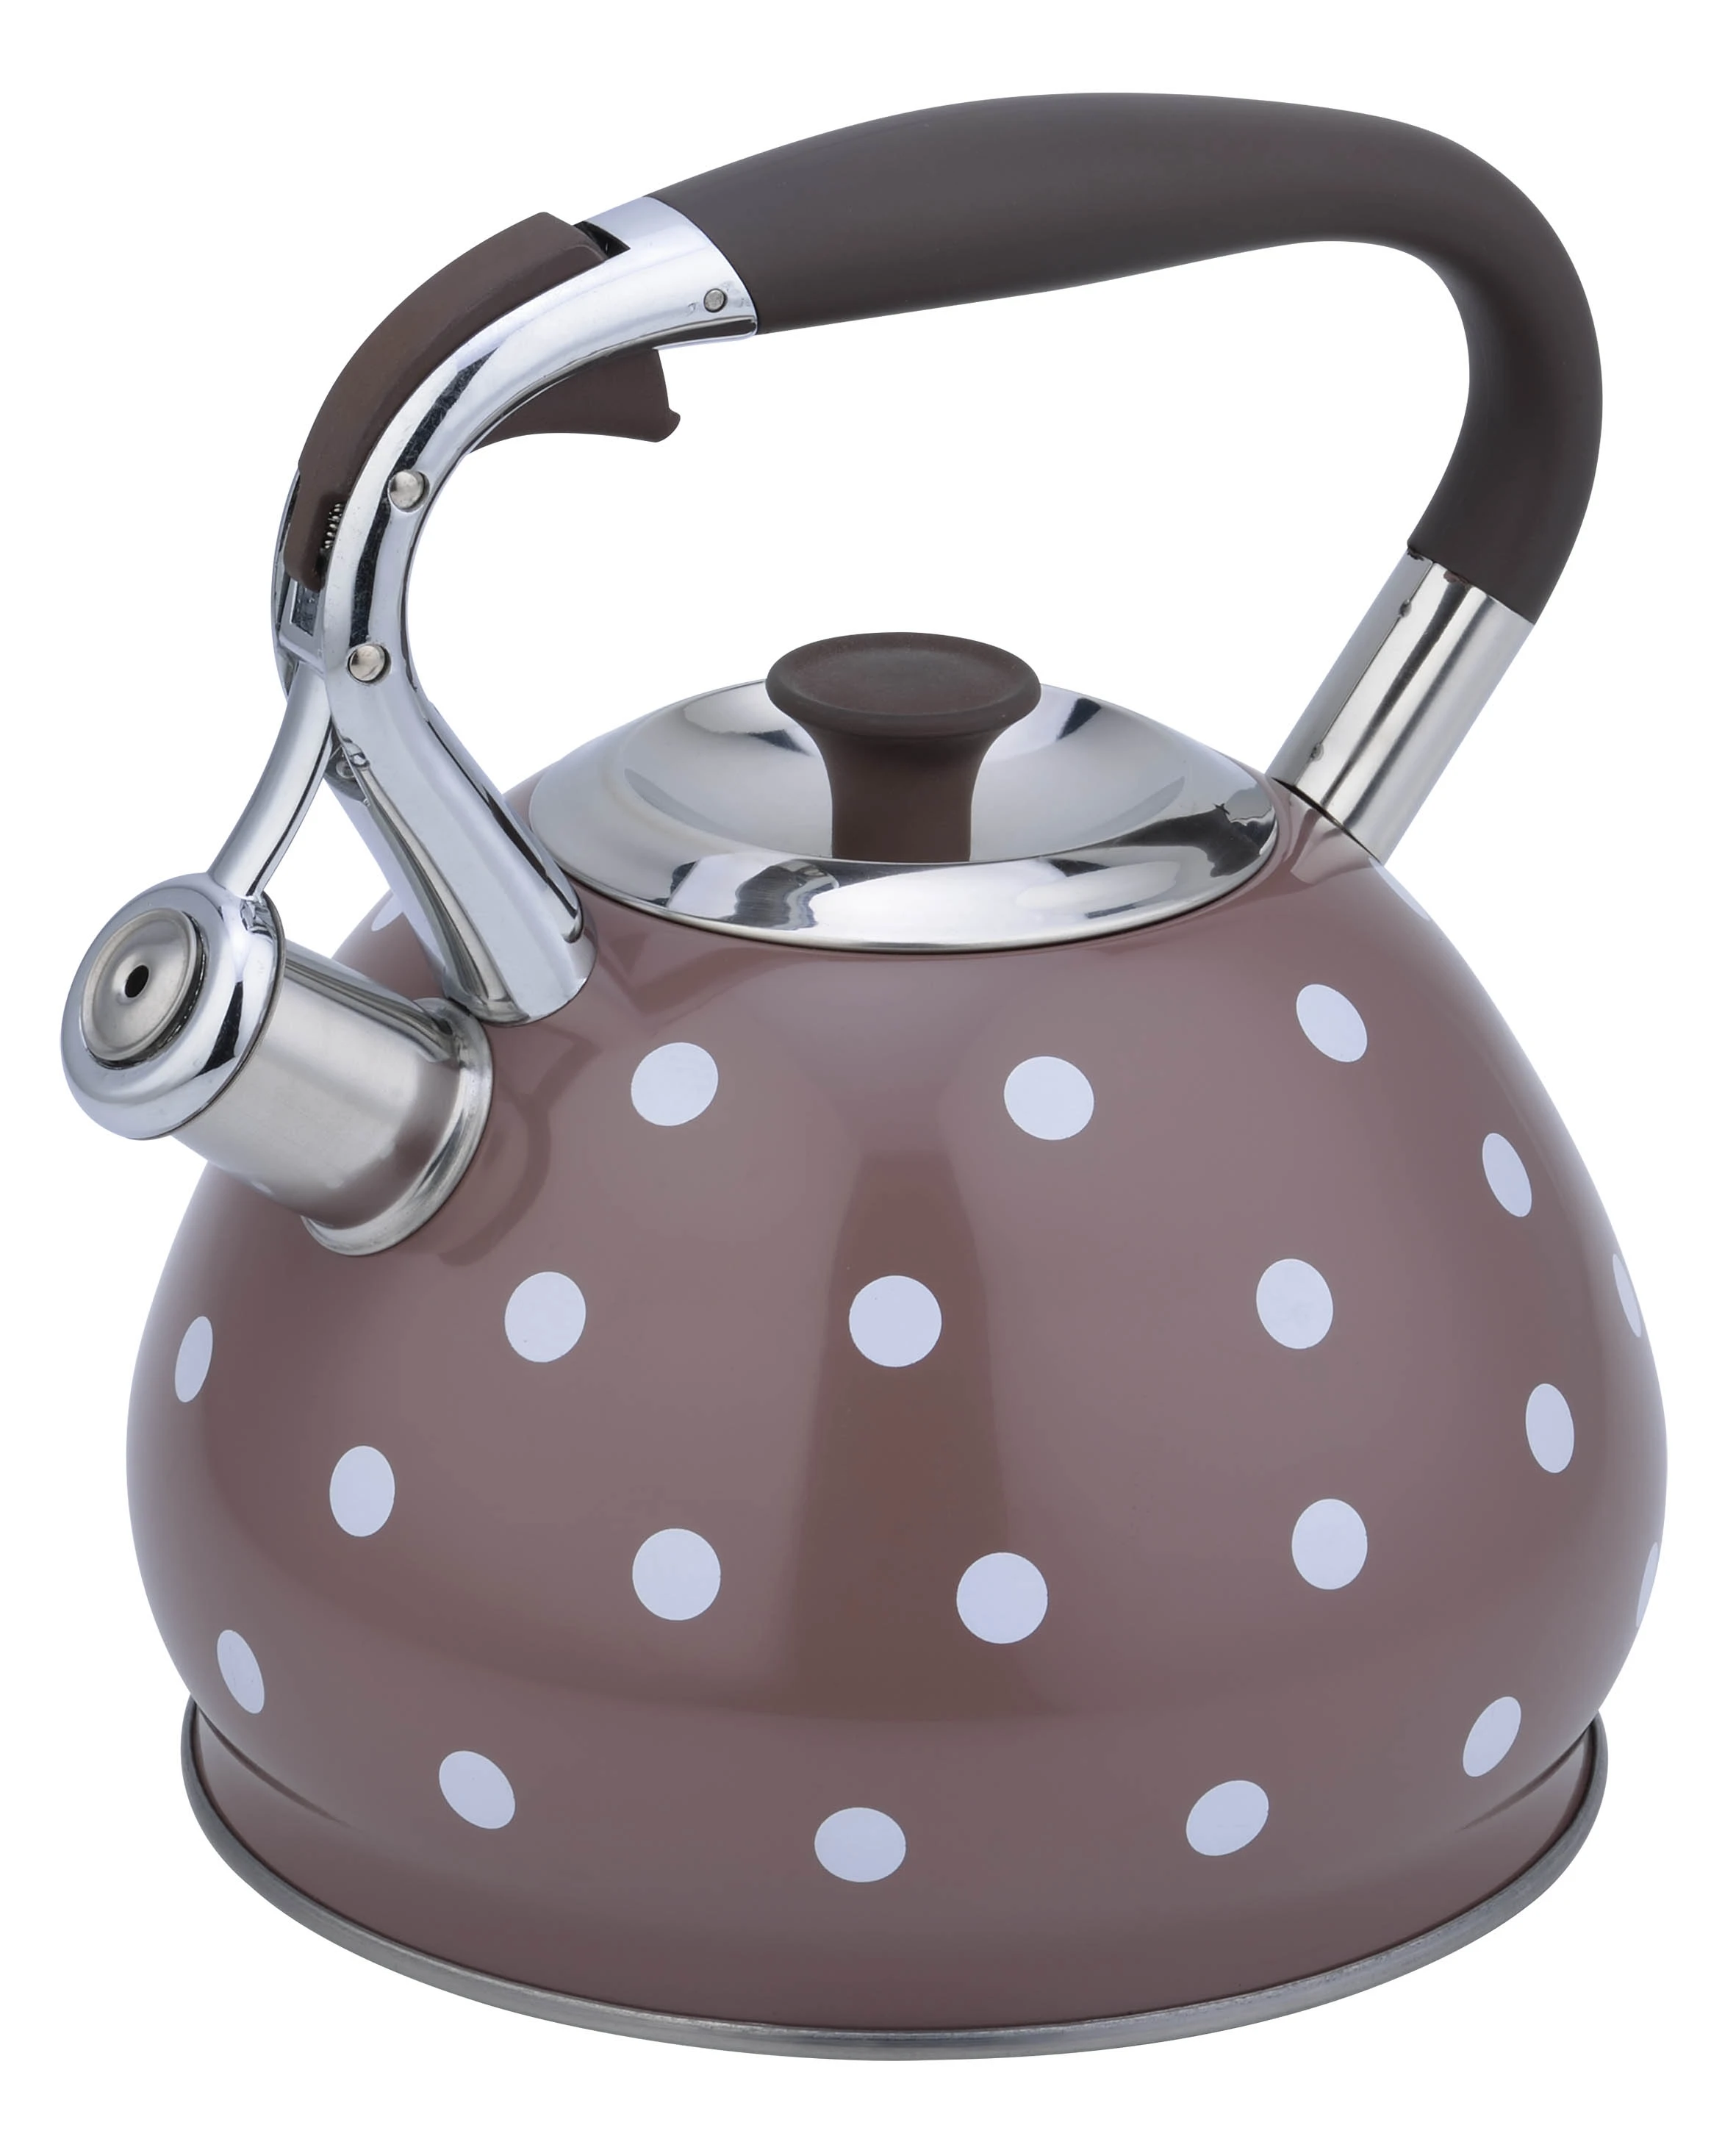 3L 5-layer bottom Stovetop Kettle Water Kettle Stainless Steel Whistling Kettle